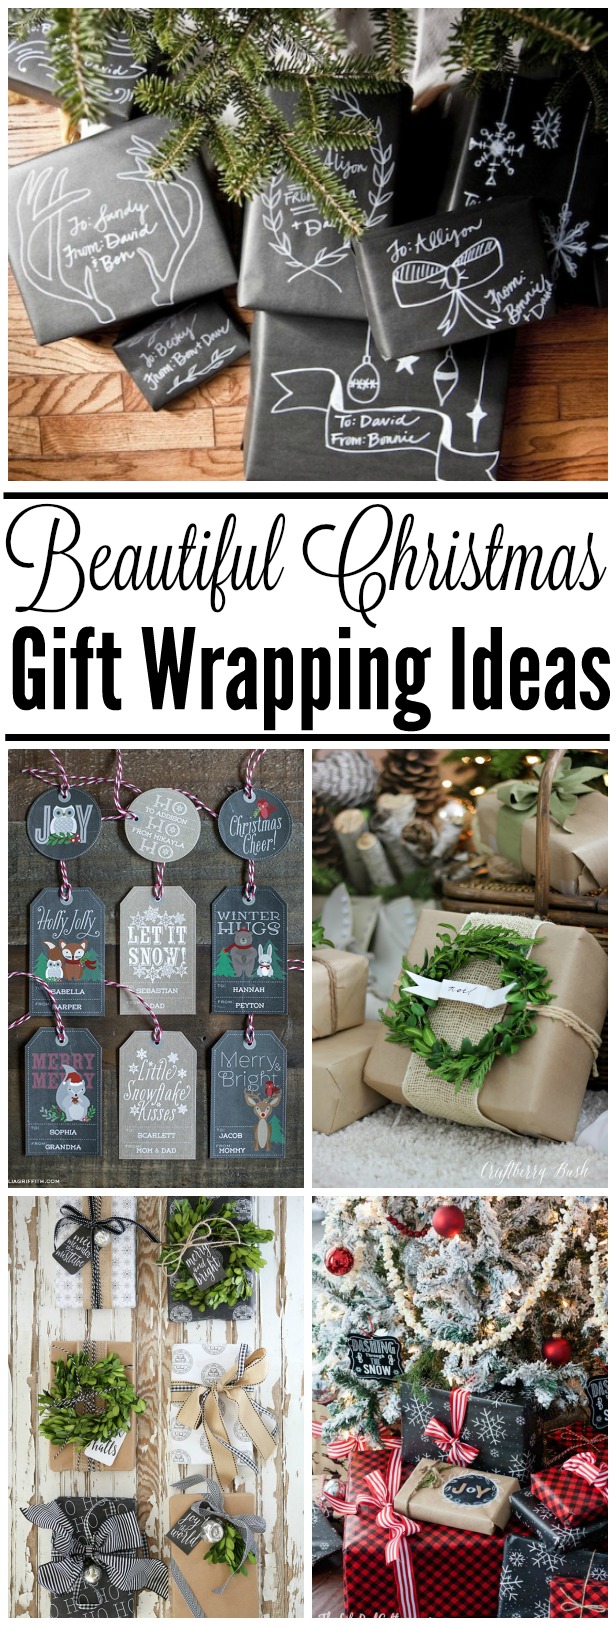 Holiday Gift Wrapping with Kraft Paper | Living Large In A Small House, LLC